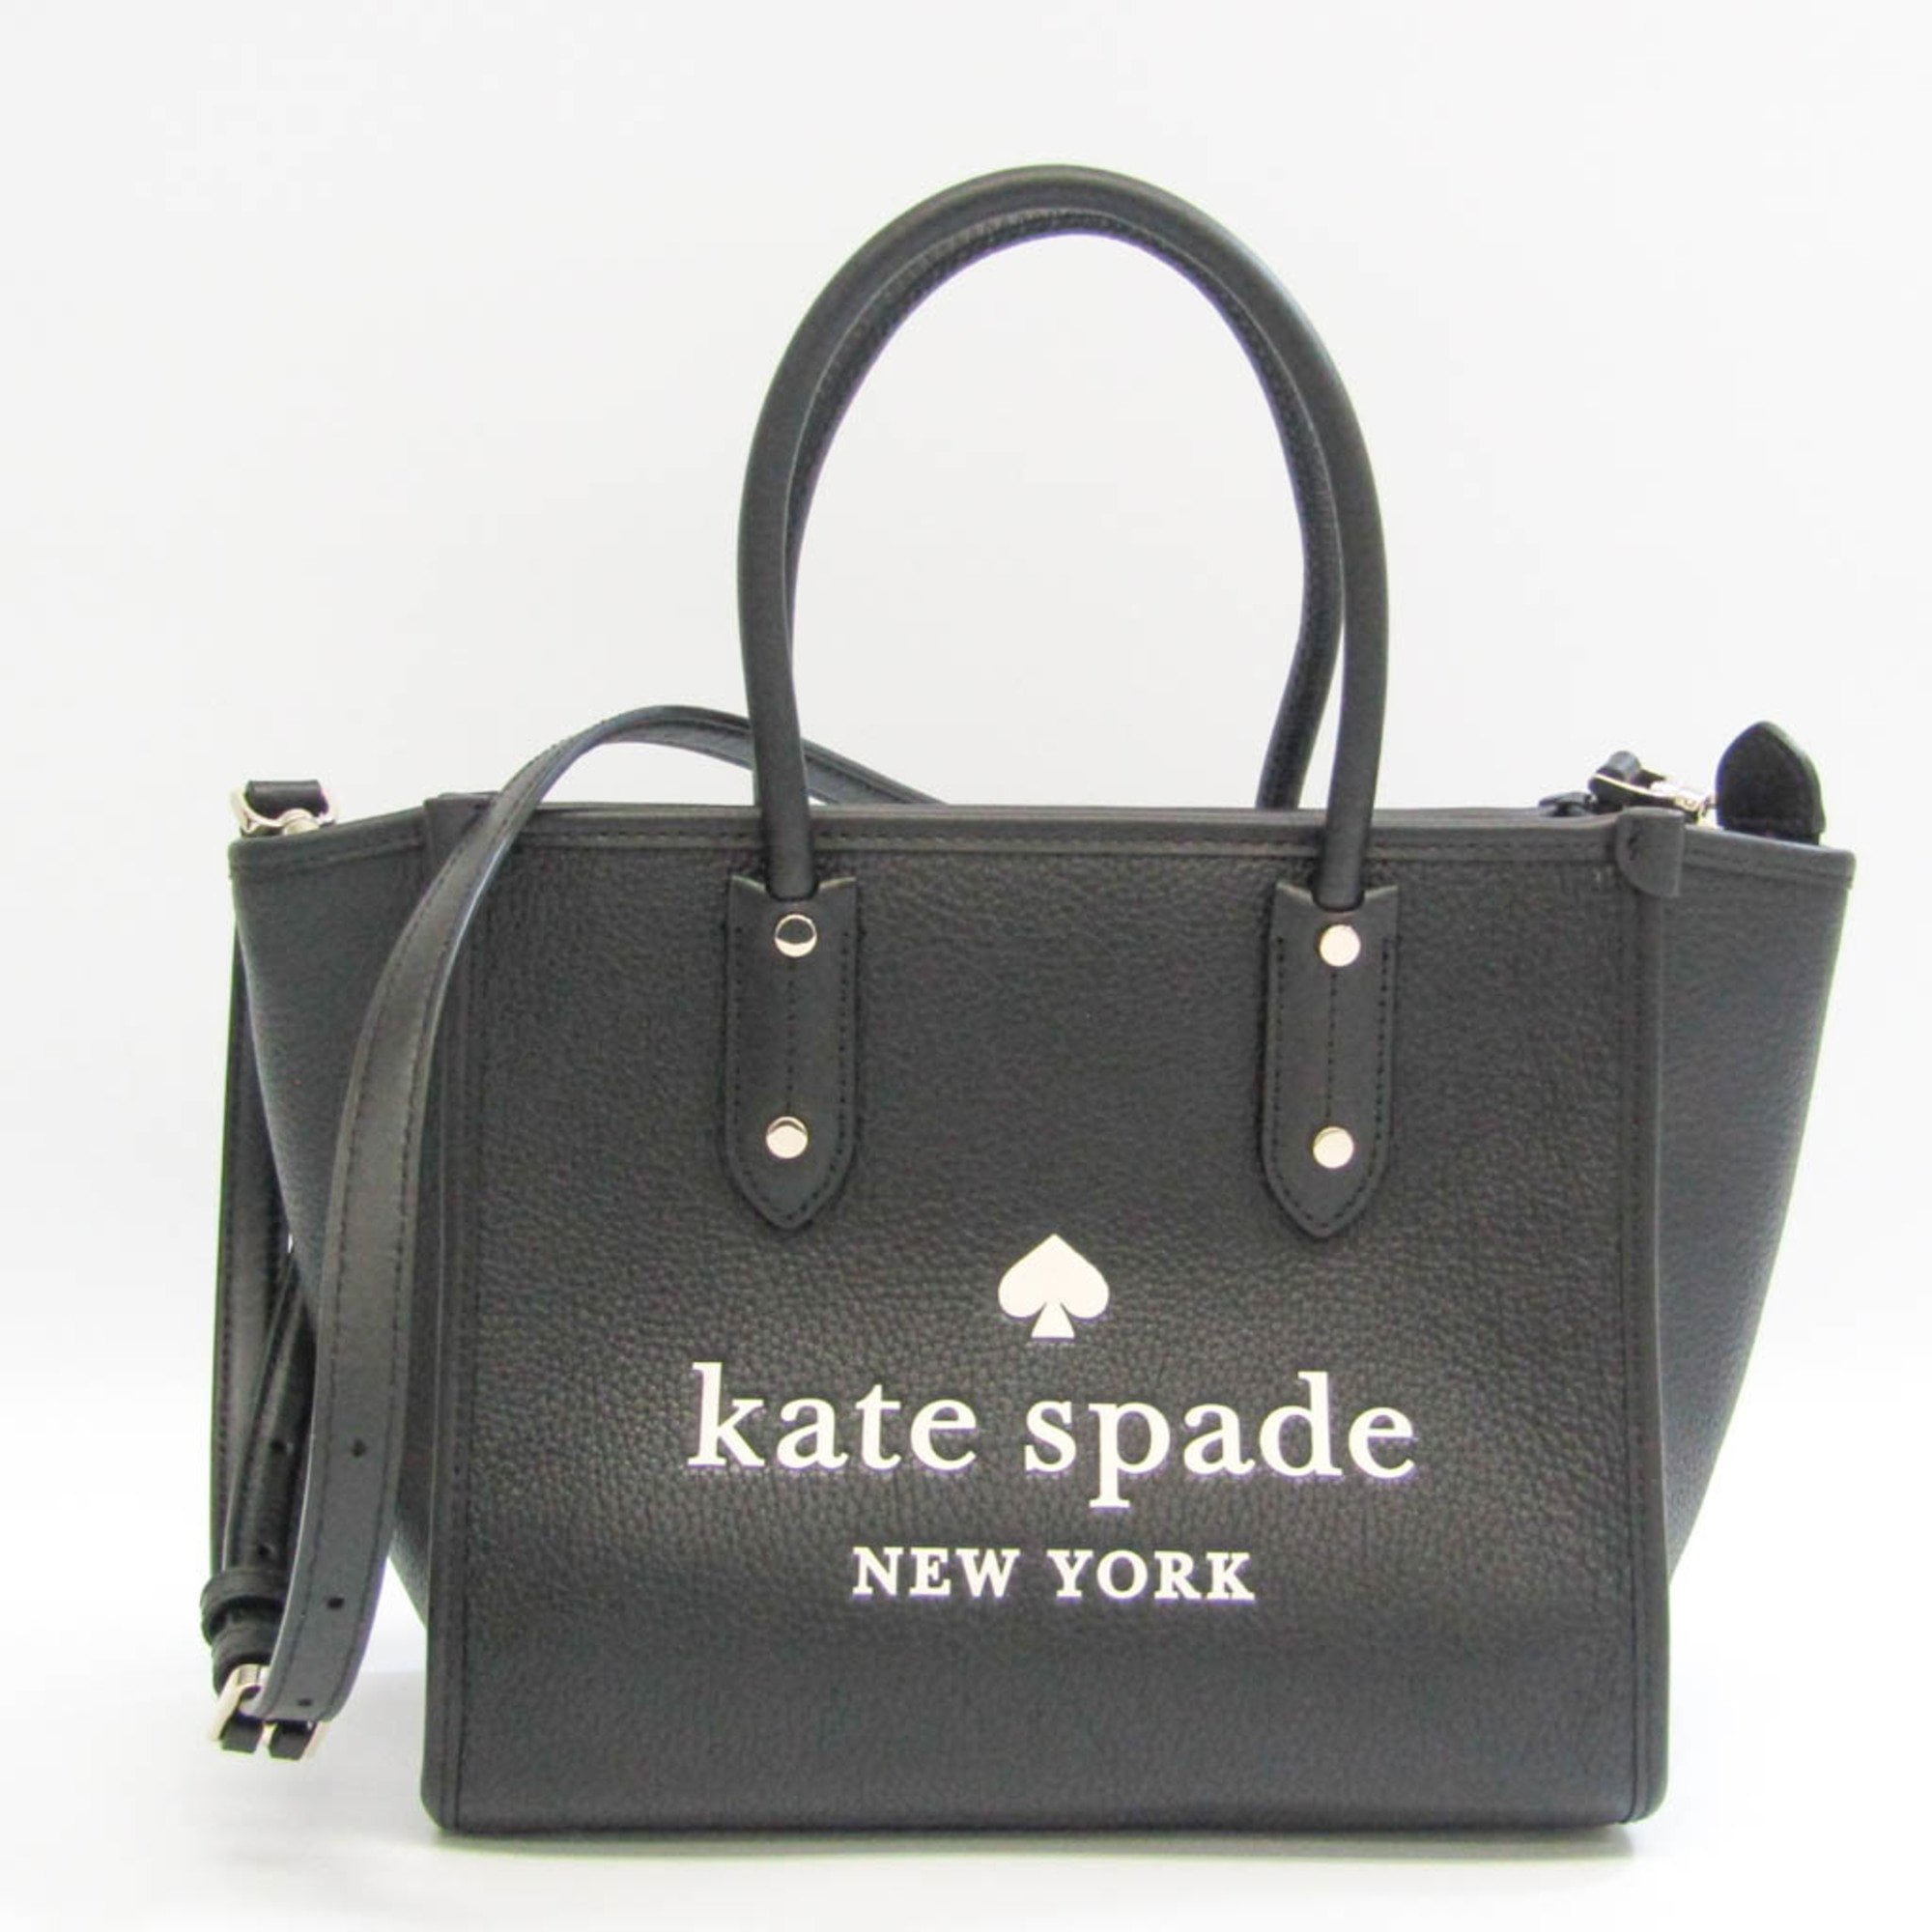 Authenticated Used Kate Spade SMALL TOTE K4689 Women's Leather Handbag,Shoulder  Bag Black 